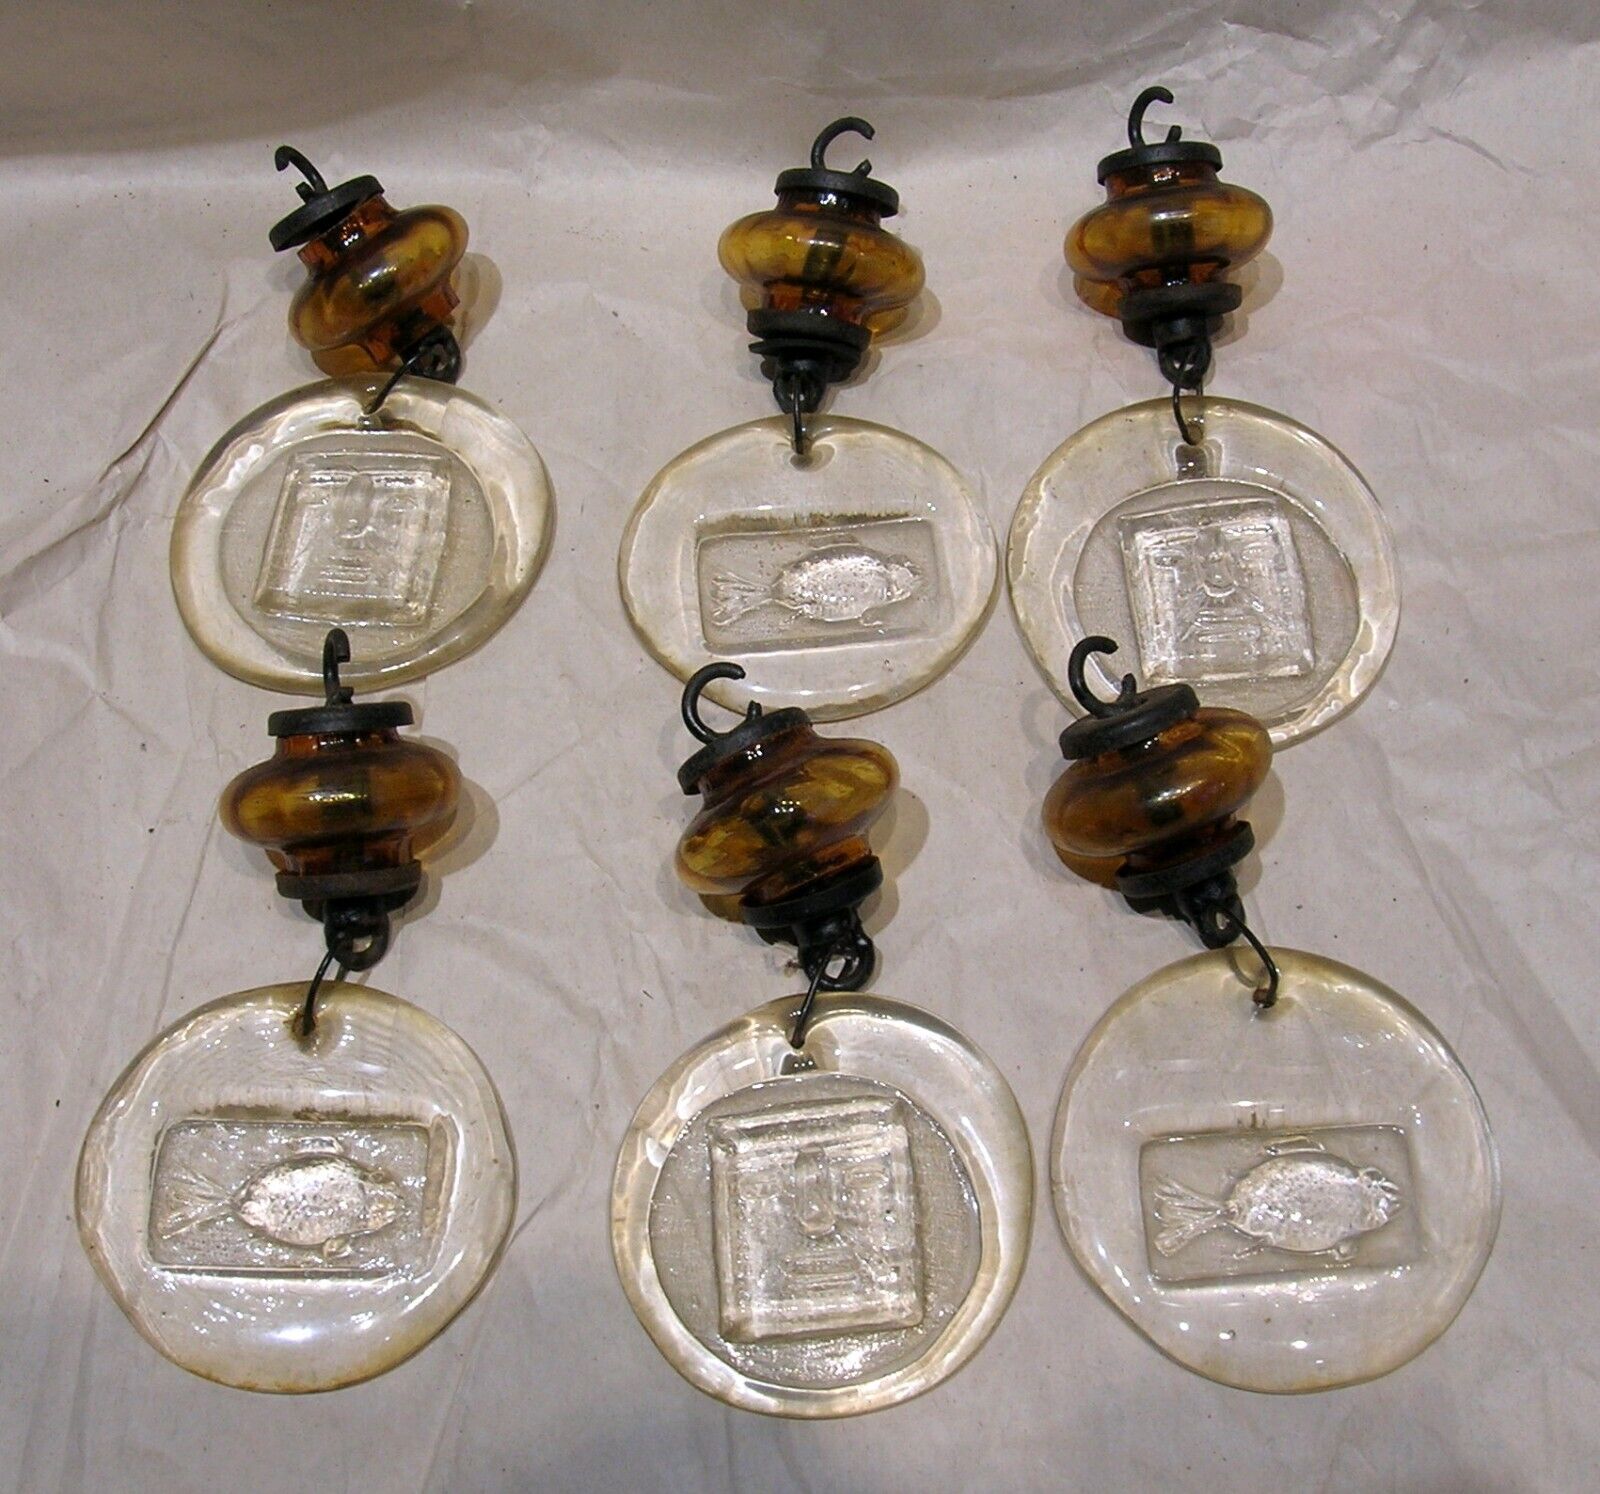 ERIK HOGLUND AUTHENTIC MCM CHANDELIER GLASS PENDANT - 1 PC ONLY - MORE AVAILABLE